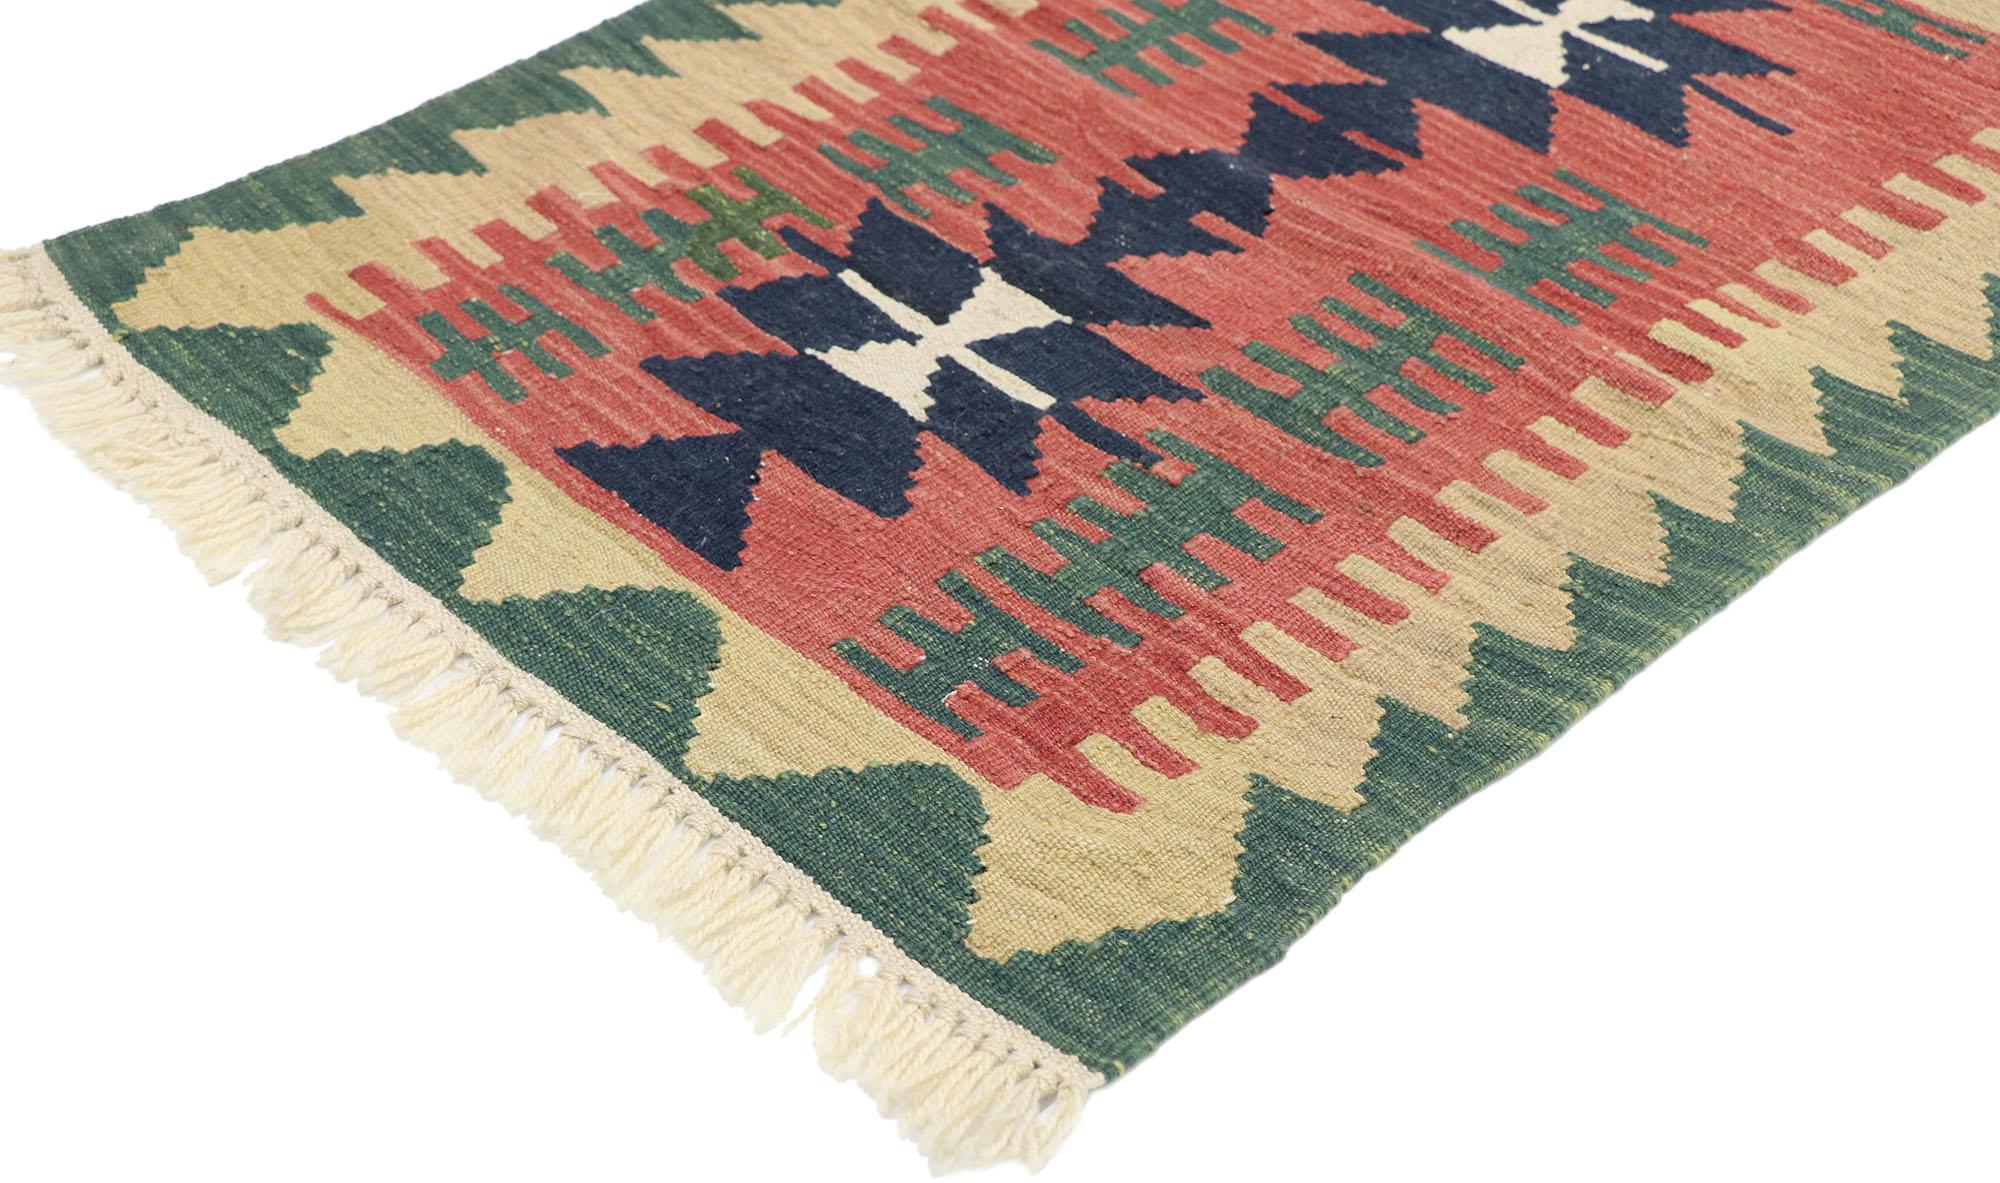 77878, Vintage Persian Shiraz Kilim rug with Tribal style 02'01 x 02'11. Full of tiny details and a bold expressive design combined with vibrant colors and tribal style, this hand-woven wool vintage Persian Shiraz kilim rug is a captivating vision